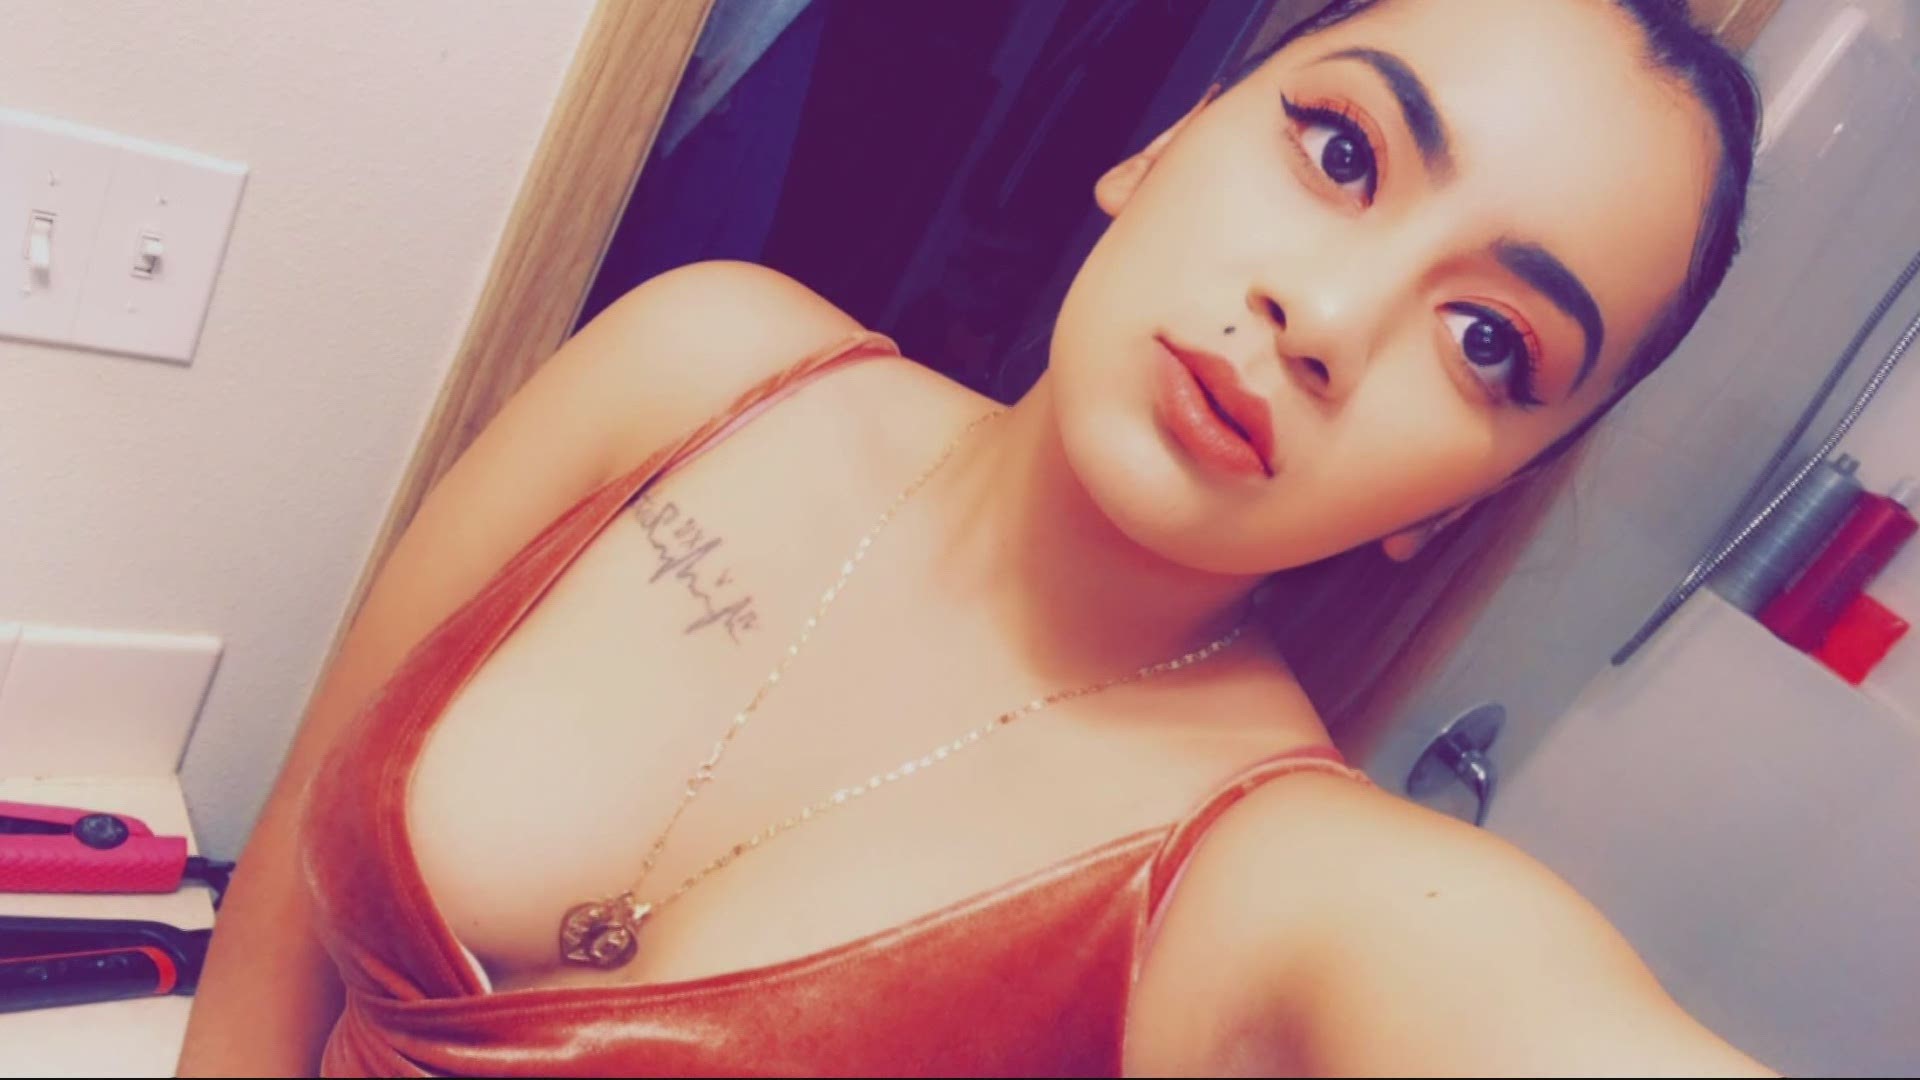 Police said 23-year-old Evelin Navarro Barajas was shot and killed in a parking in Northeast Portland on June 18, 2020. Joe Raineri has the latest on the case.